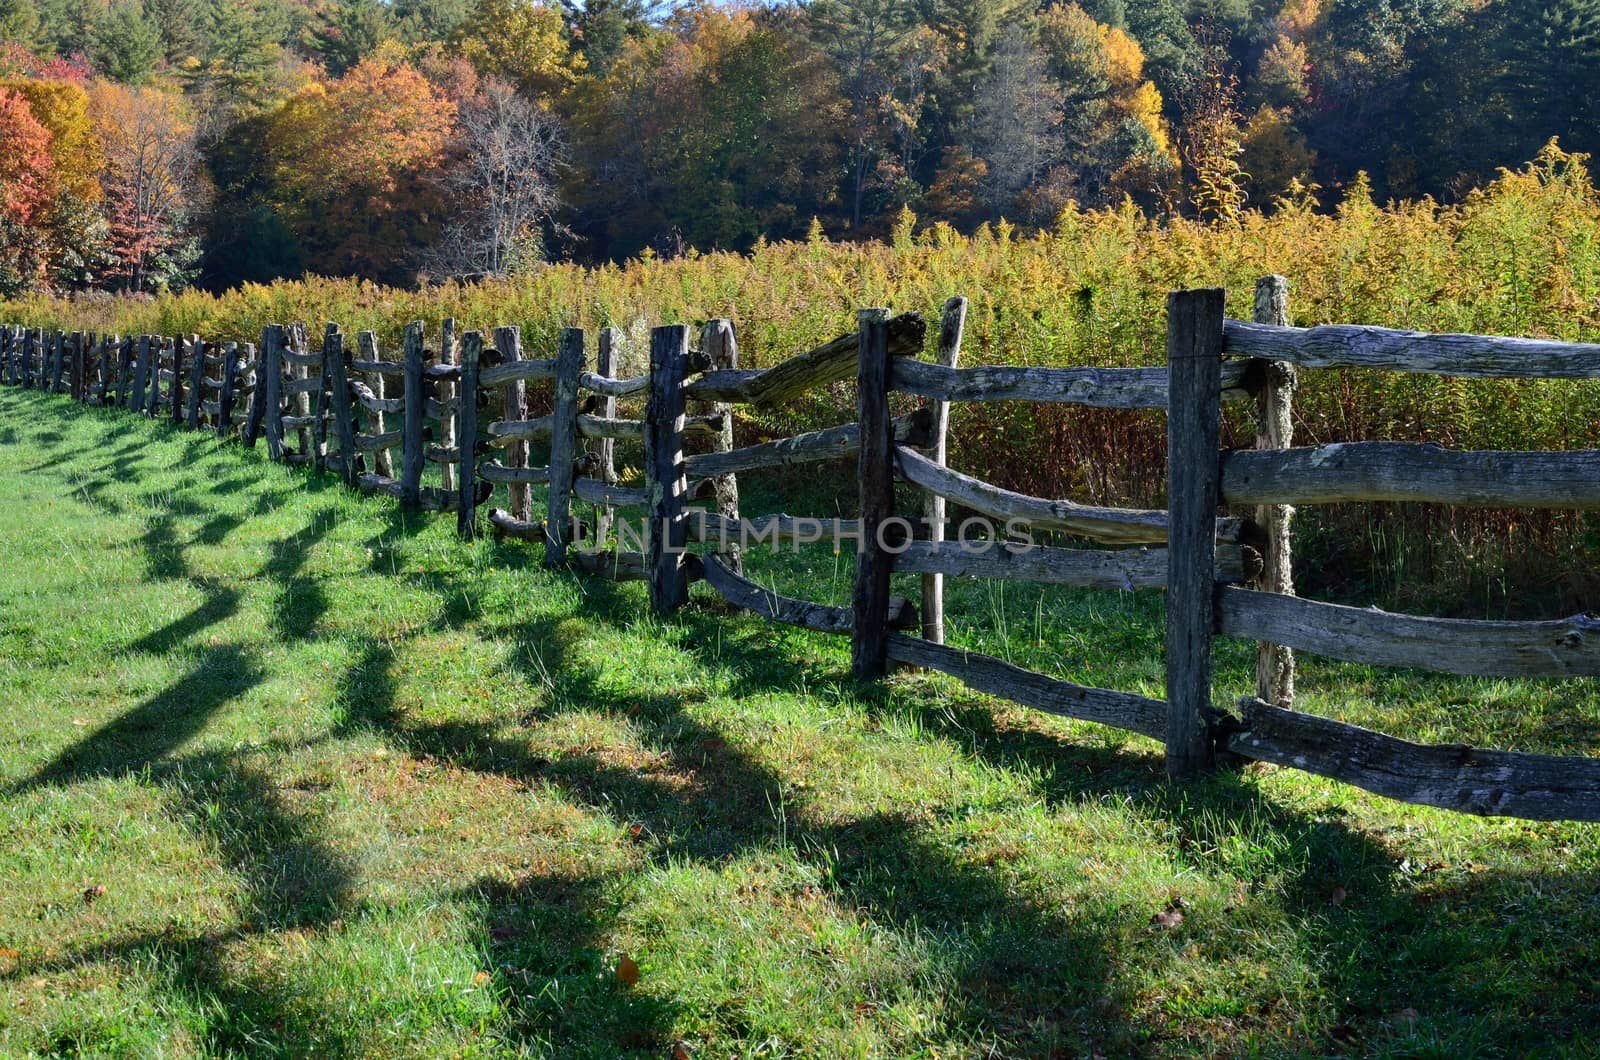 A rail fence along the countryside casts squiggly shadows in the early fall morning light